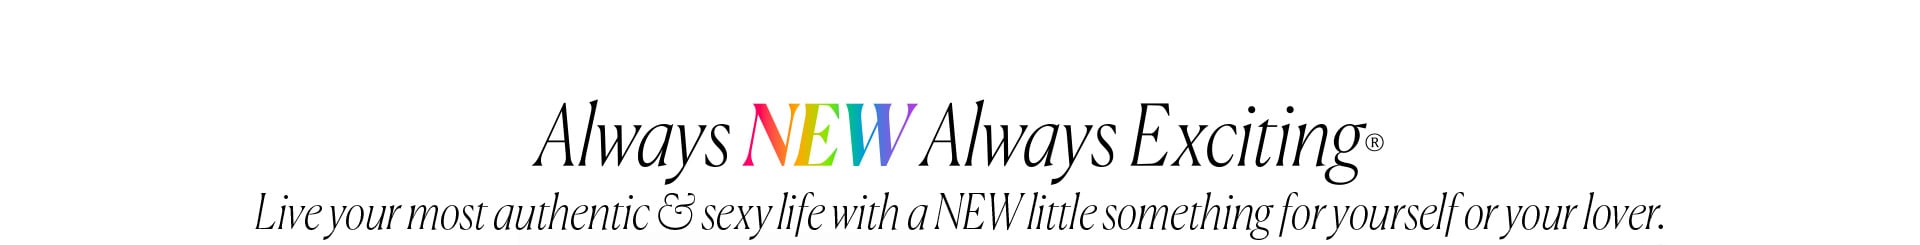 Always New Always Exciting - Live your most authentic & sexy life with a NEW little something for yourself or your lover.